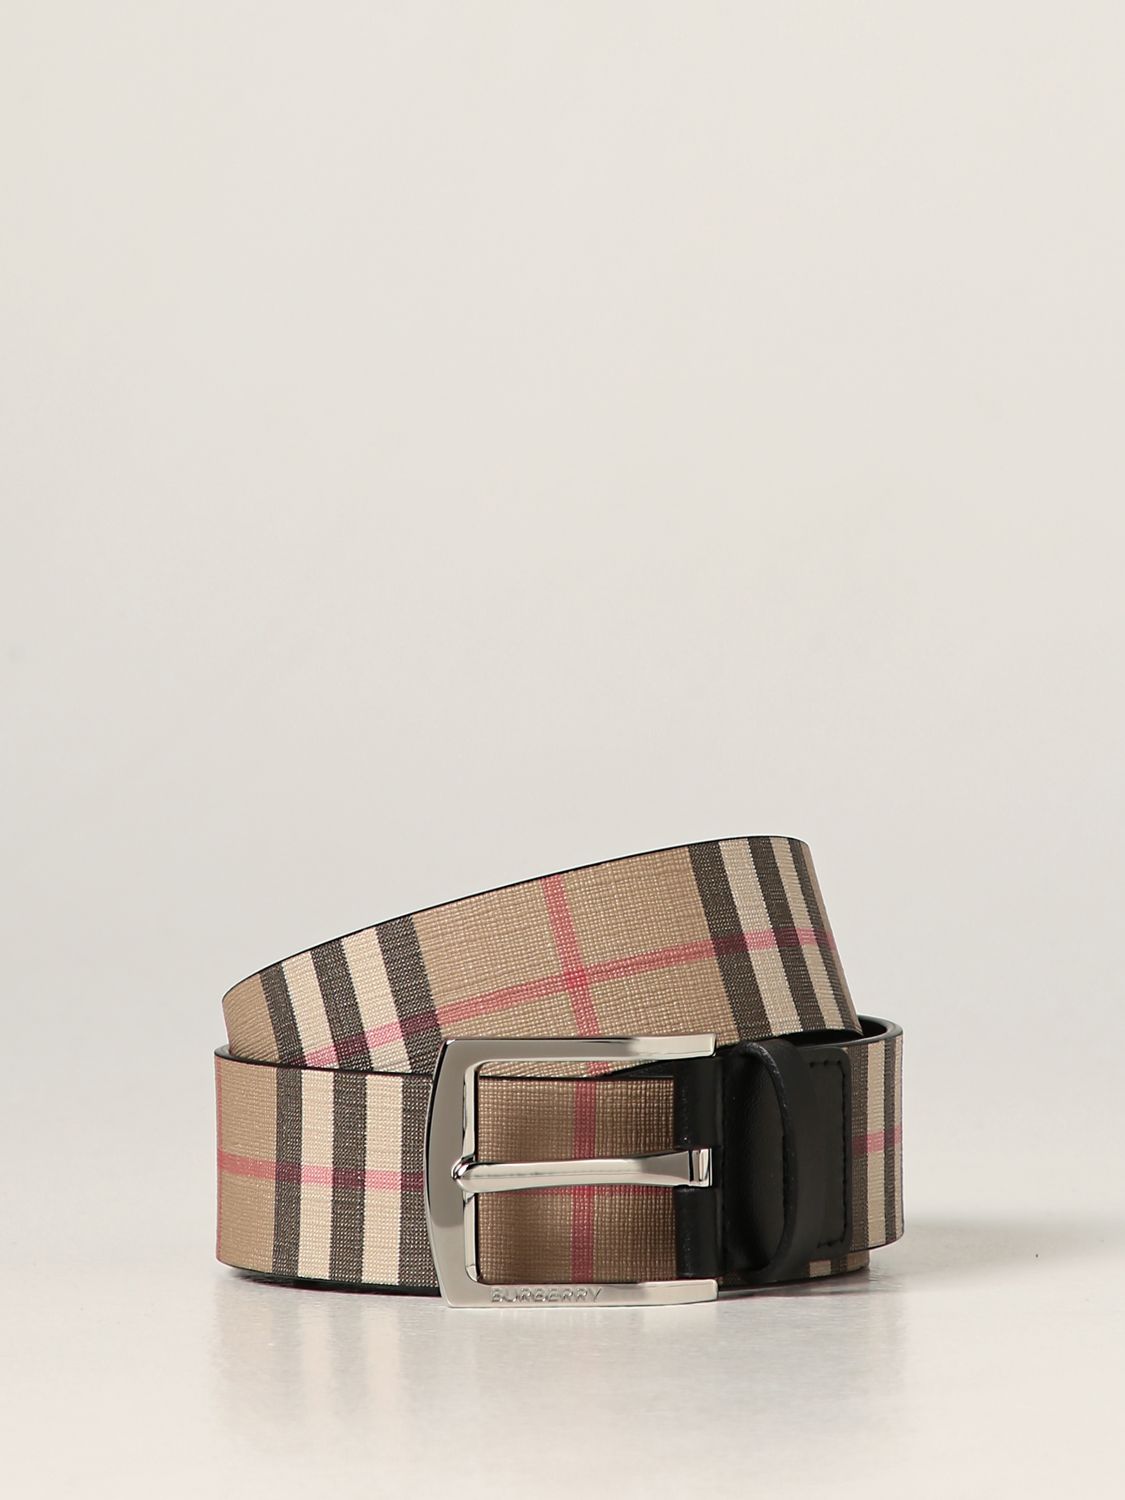 Shop the Burberry belt online now at www.renaissancecorp.com/shop. 🤩 # burberry #burberrybelt #designeraccessories